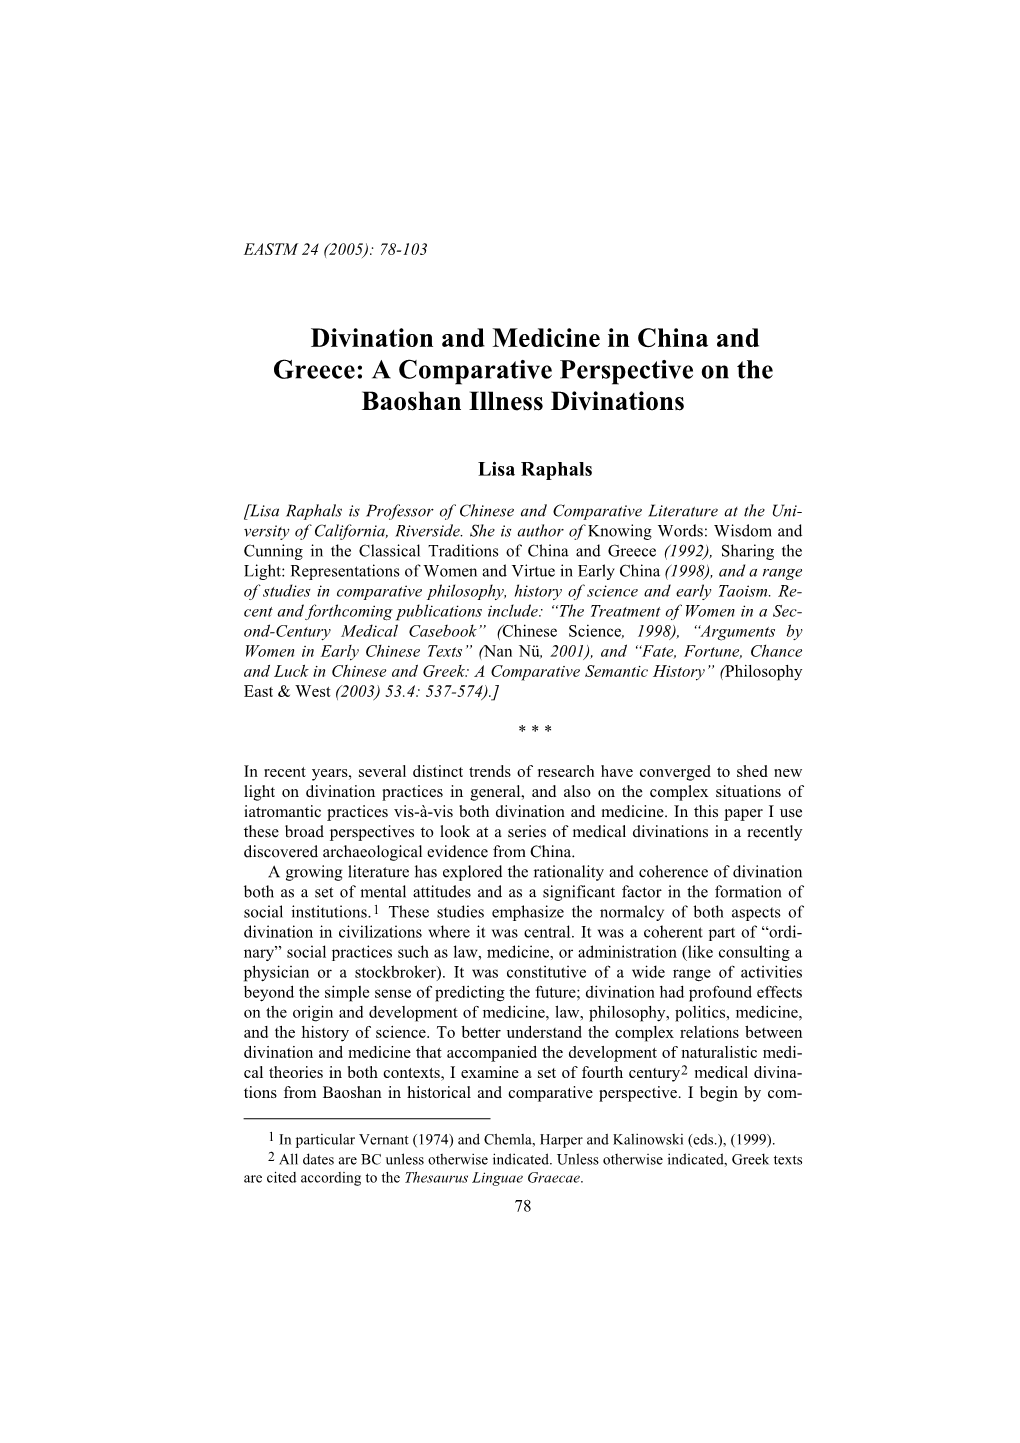 Divination and Medicine in China and Greece: a Comparative Perspective on the Baoshan Illness Divinations